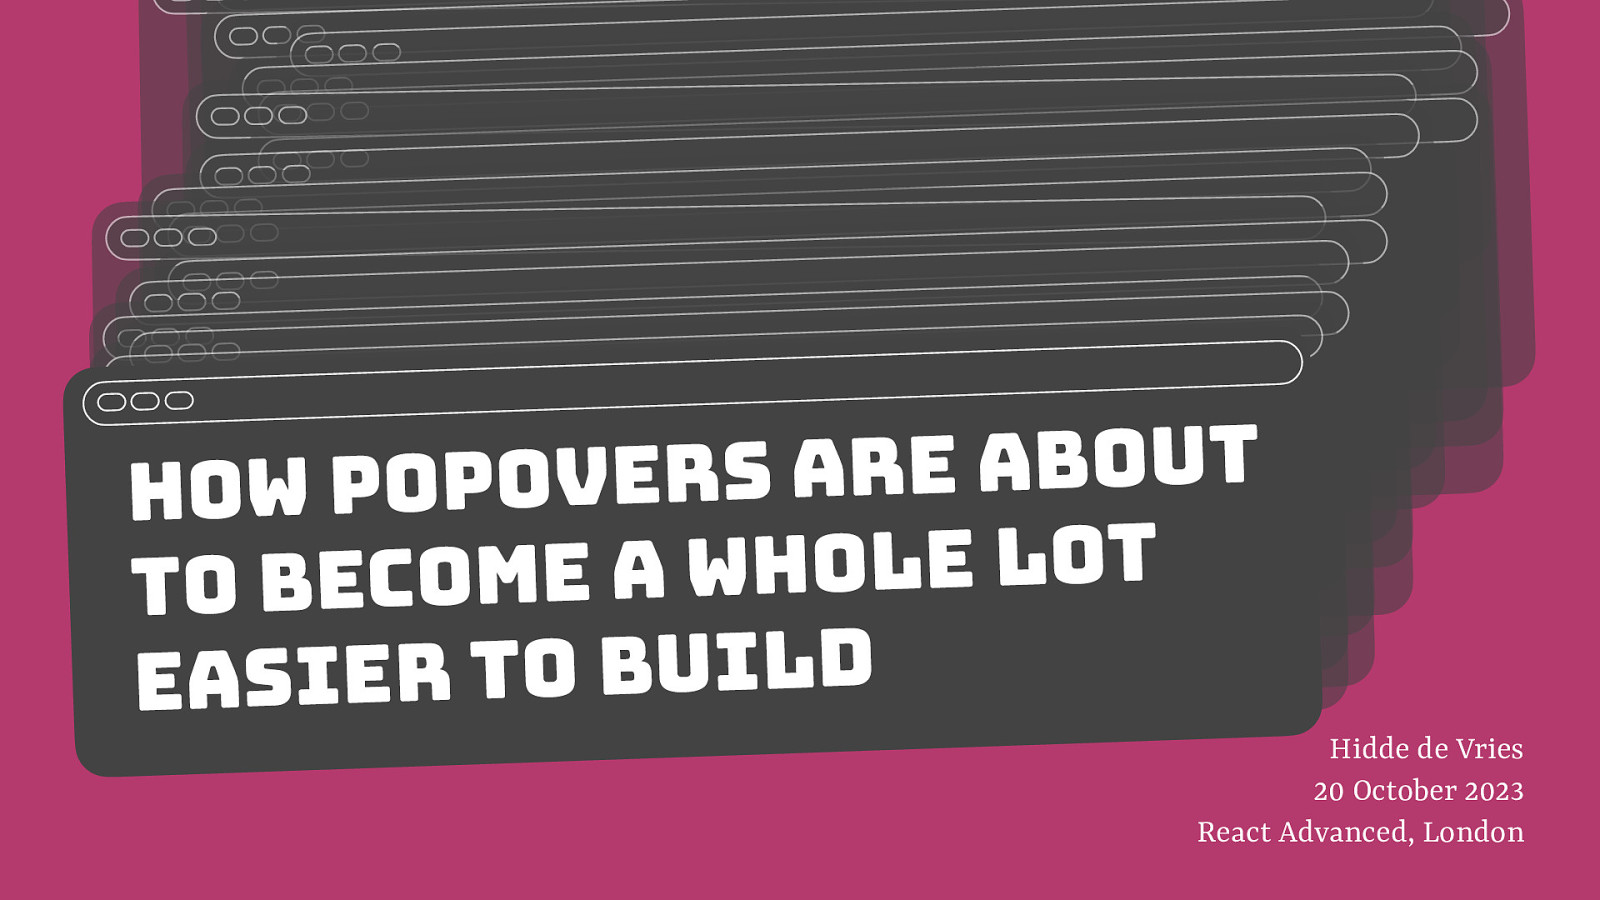 Popover are about to become a whole lot easier to build